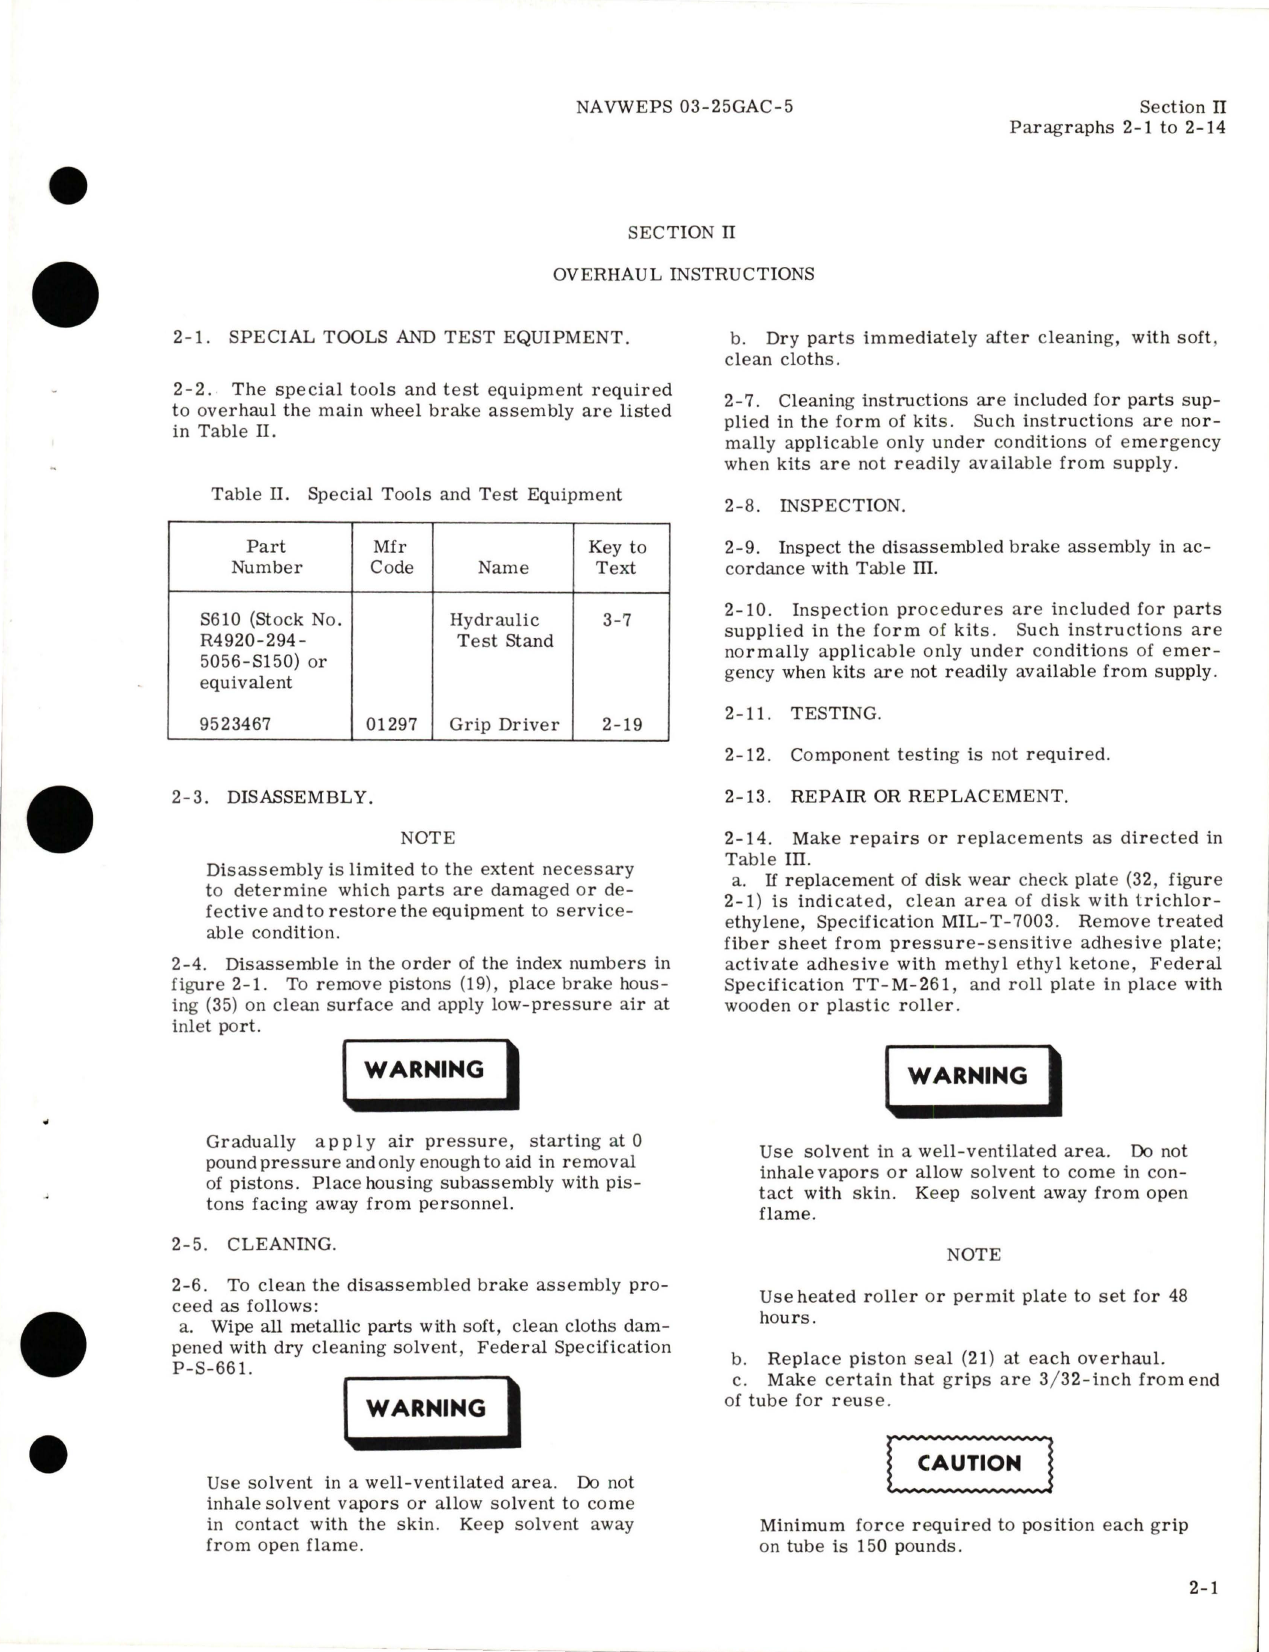 Sample page 7 from AirCorps Library document: Overhaul Instructions for Main Wheel Brake Assembly - Part 9560538